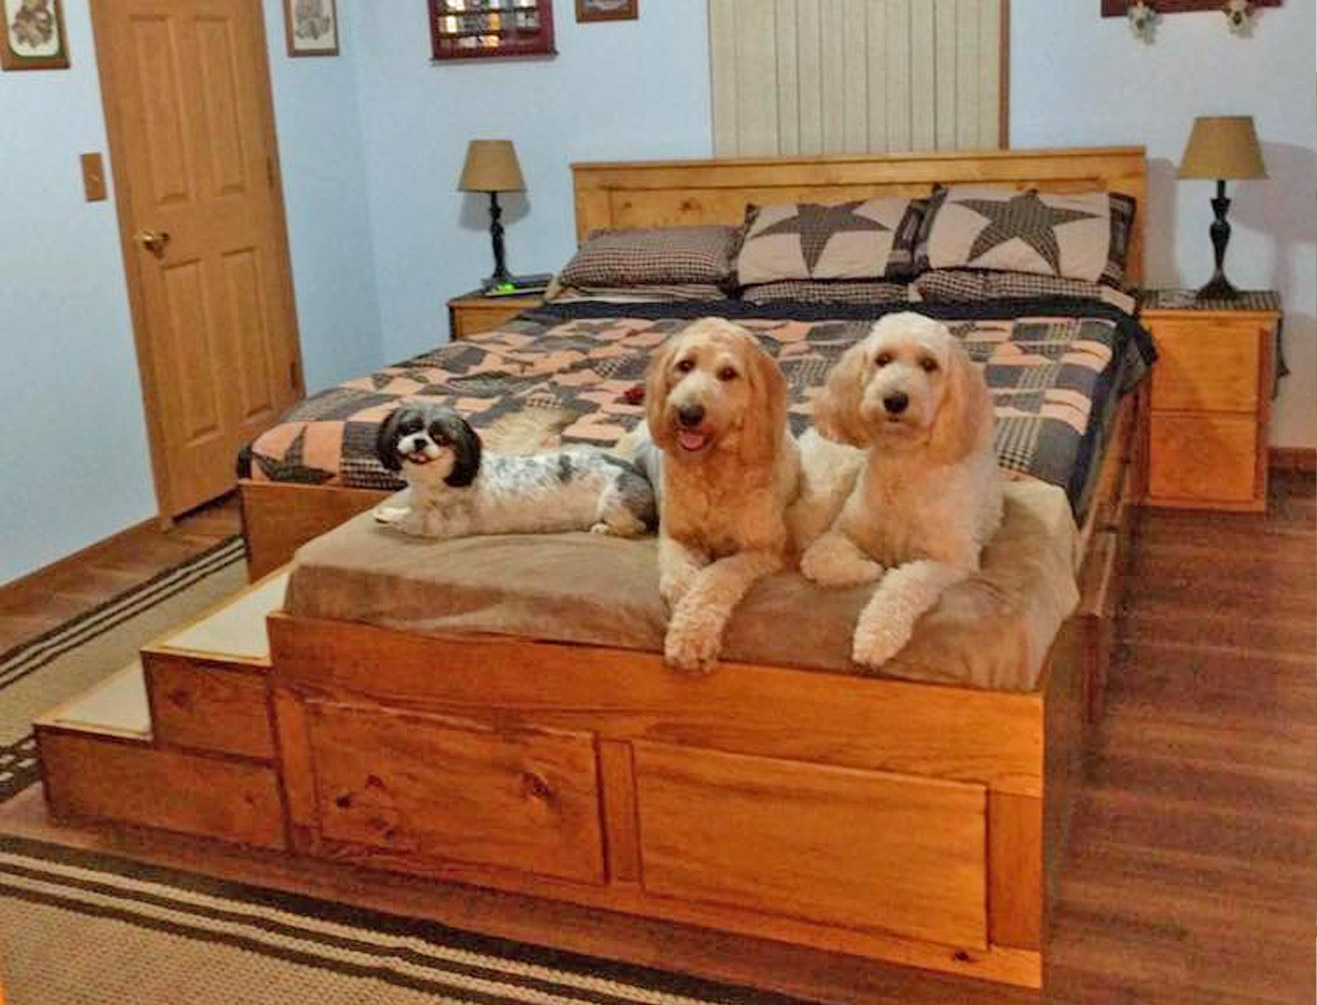 King Bed Has Built In Stairs Along With Extra Space At The End Of It For Your Dogs - Wooden king bed with space for dogs